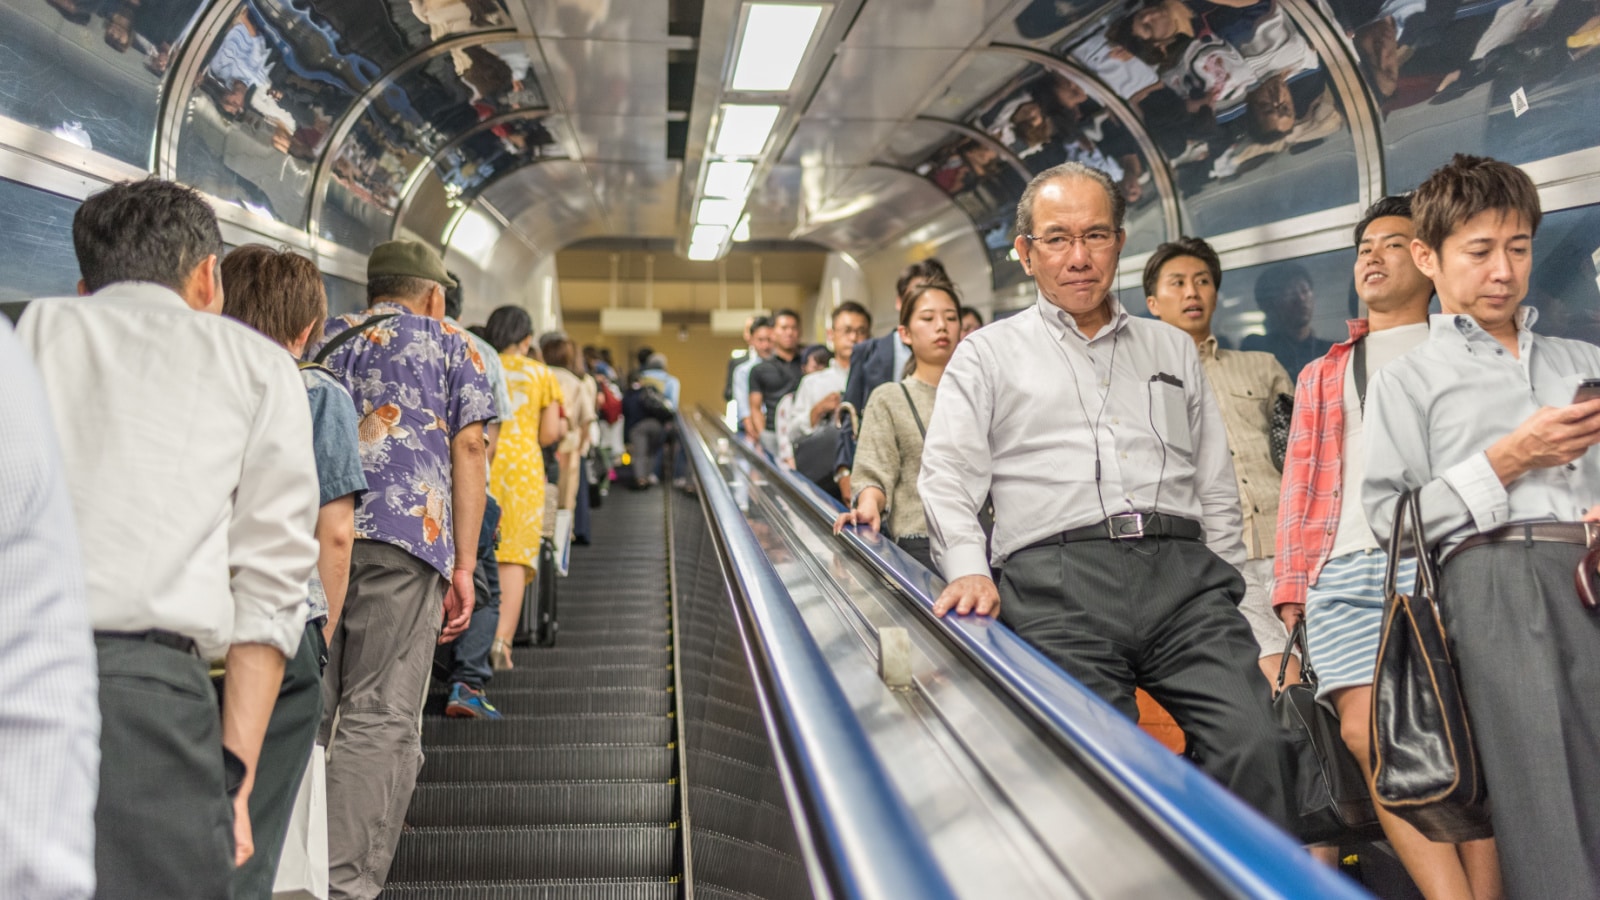 <p>There are rules for using an escalator in Japan. If one is using an escalator in Tokyo, they have to stand in the left corner, leaving the other corner for people who wish to walk up the escalator. And if one is in Osaka, one must stand in the right corner and leave the left corner open for walking.</p>